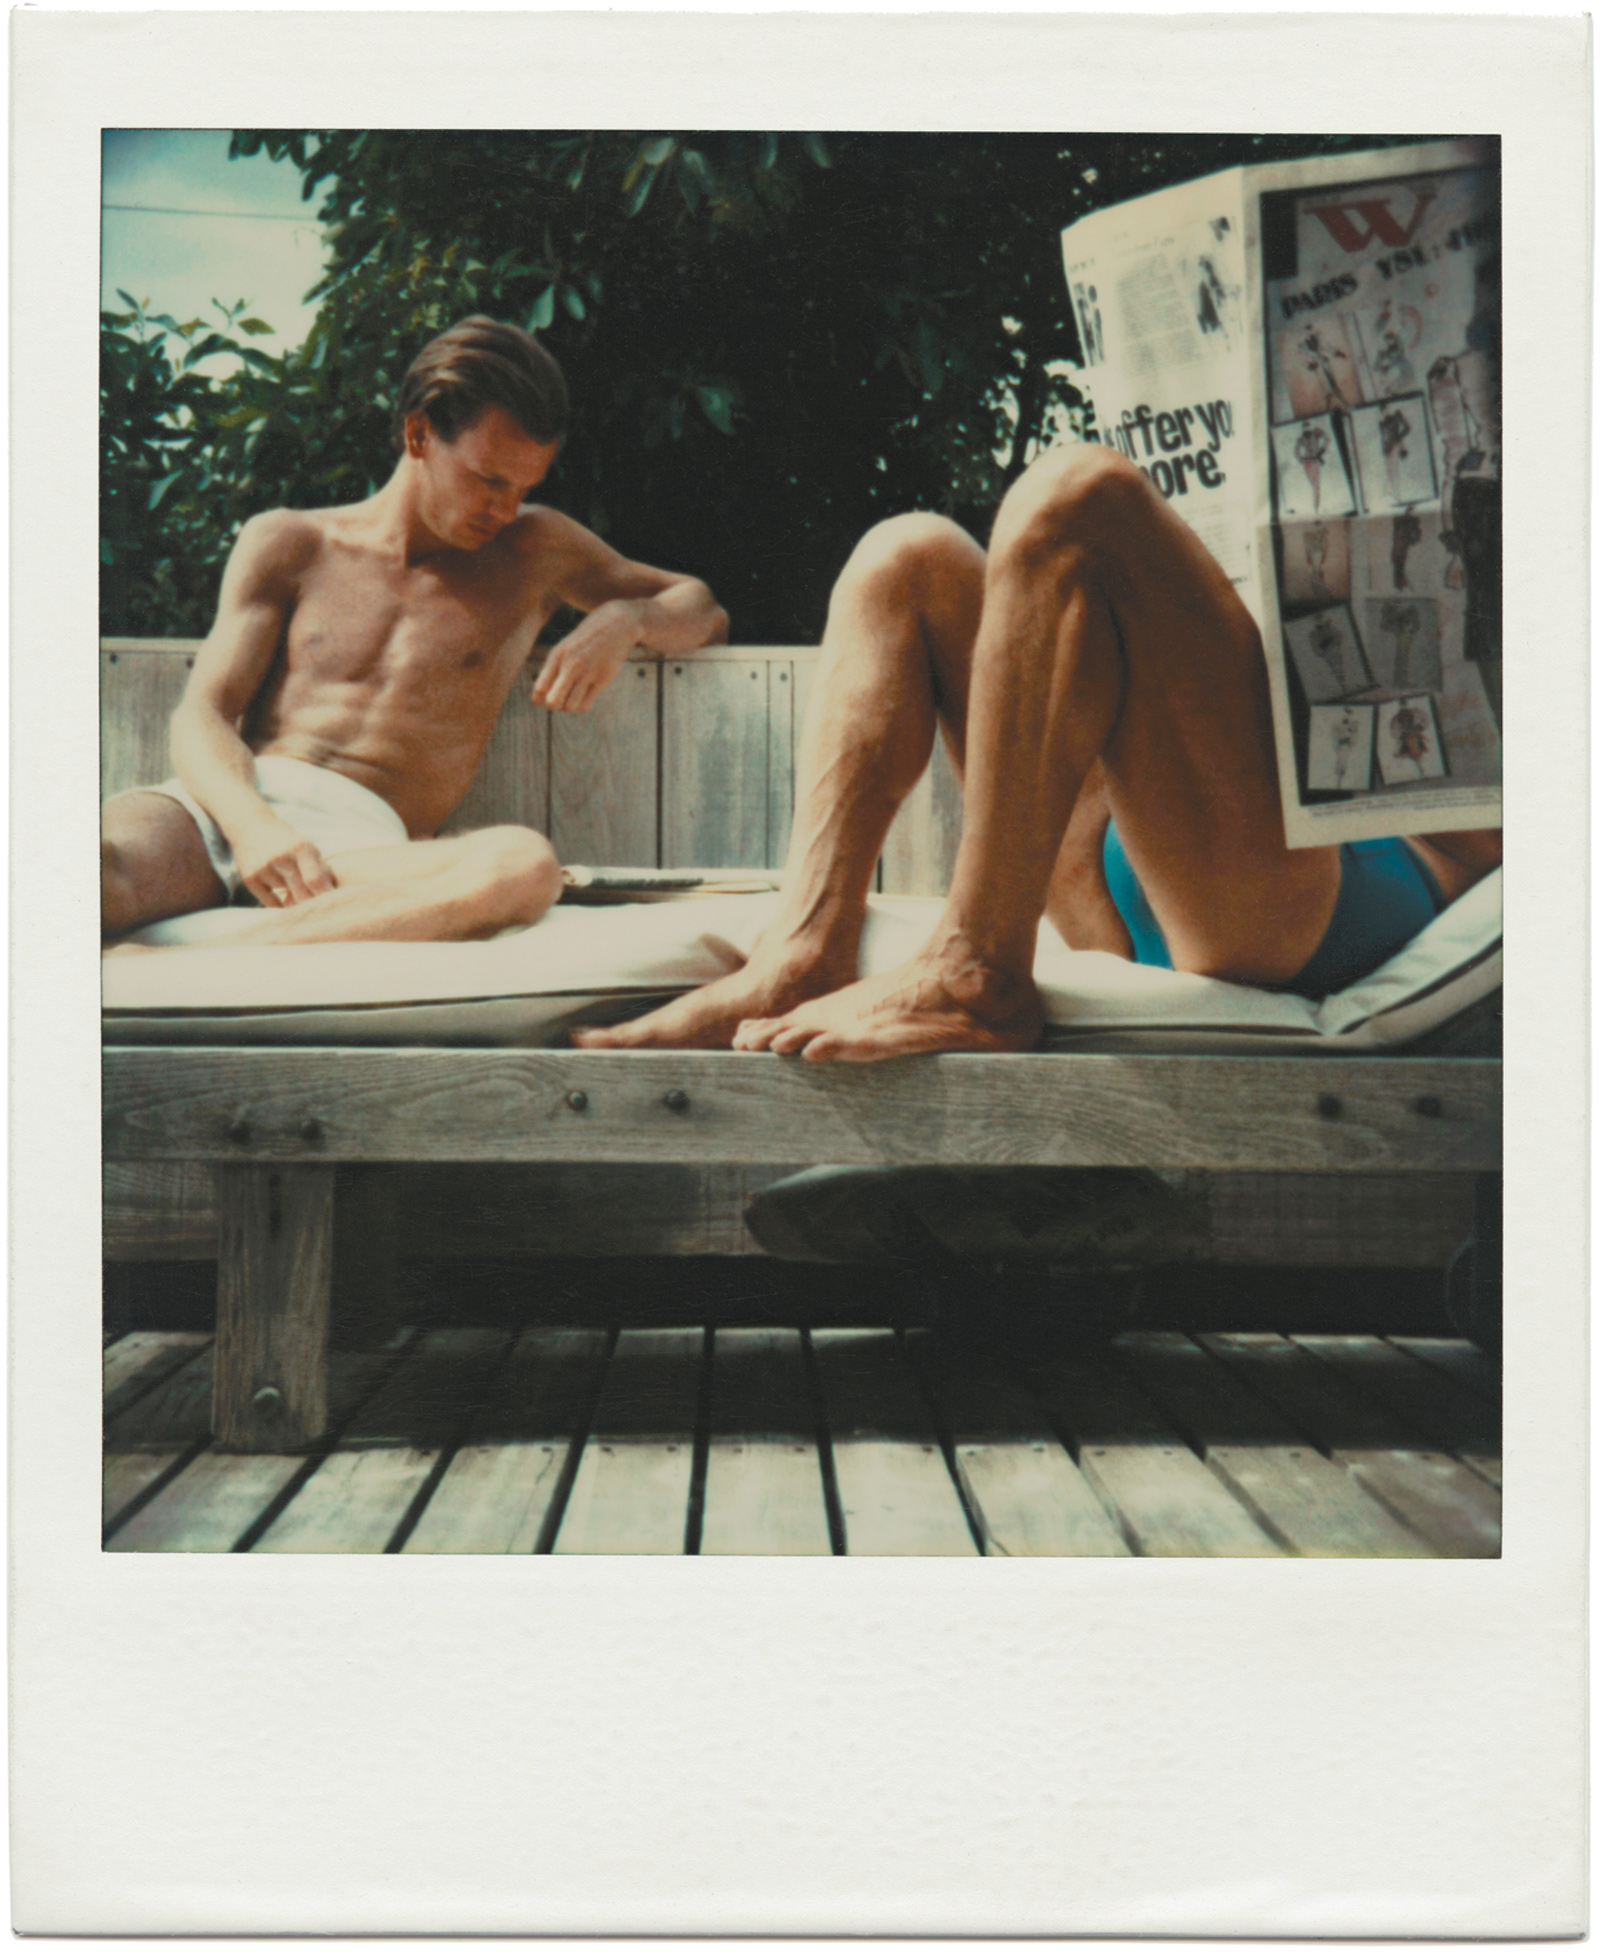 Photograph by Tom Bianchi from his book Fire Island Pines: Polaroids 1975–1983, published by Damiani